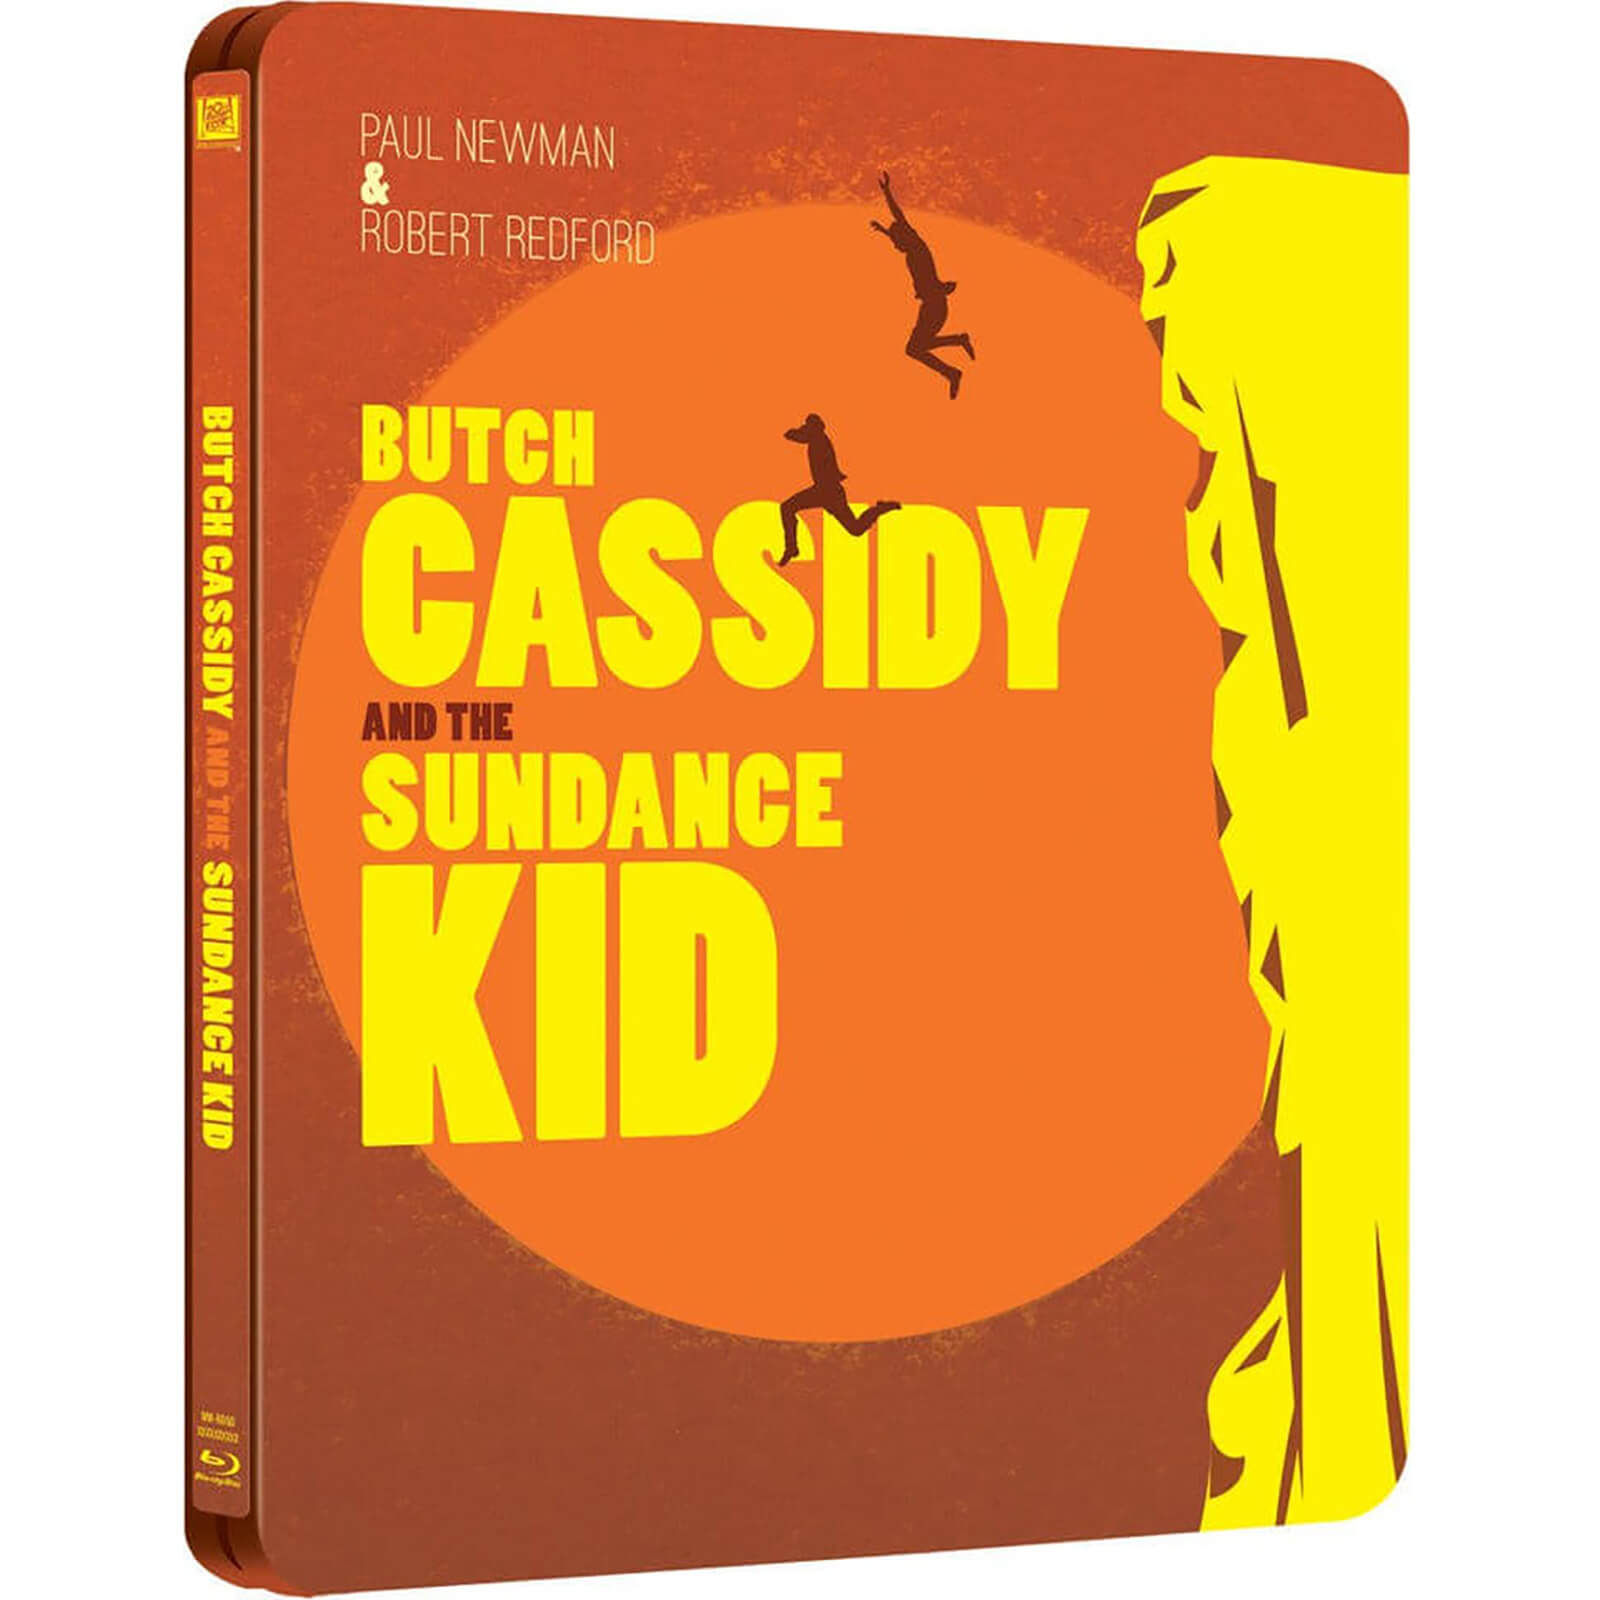 Butch Cassidy and the Sundance Kid - Limited Edition Steelbook